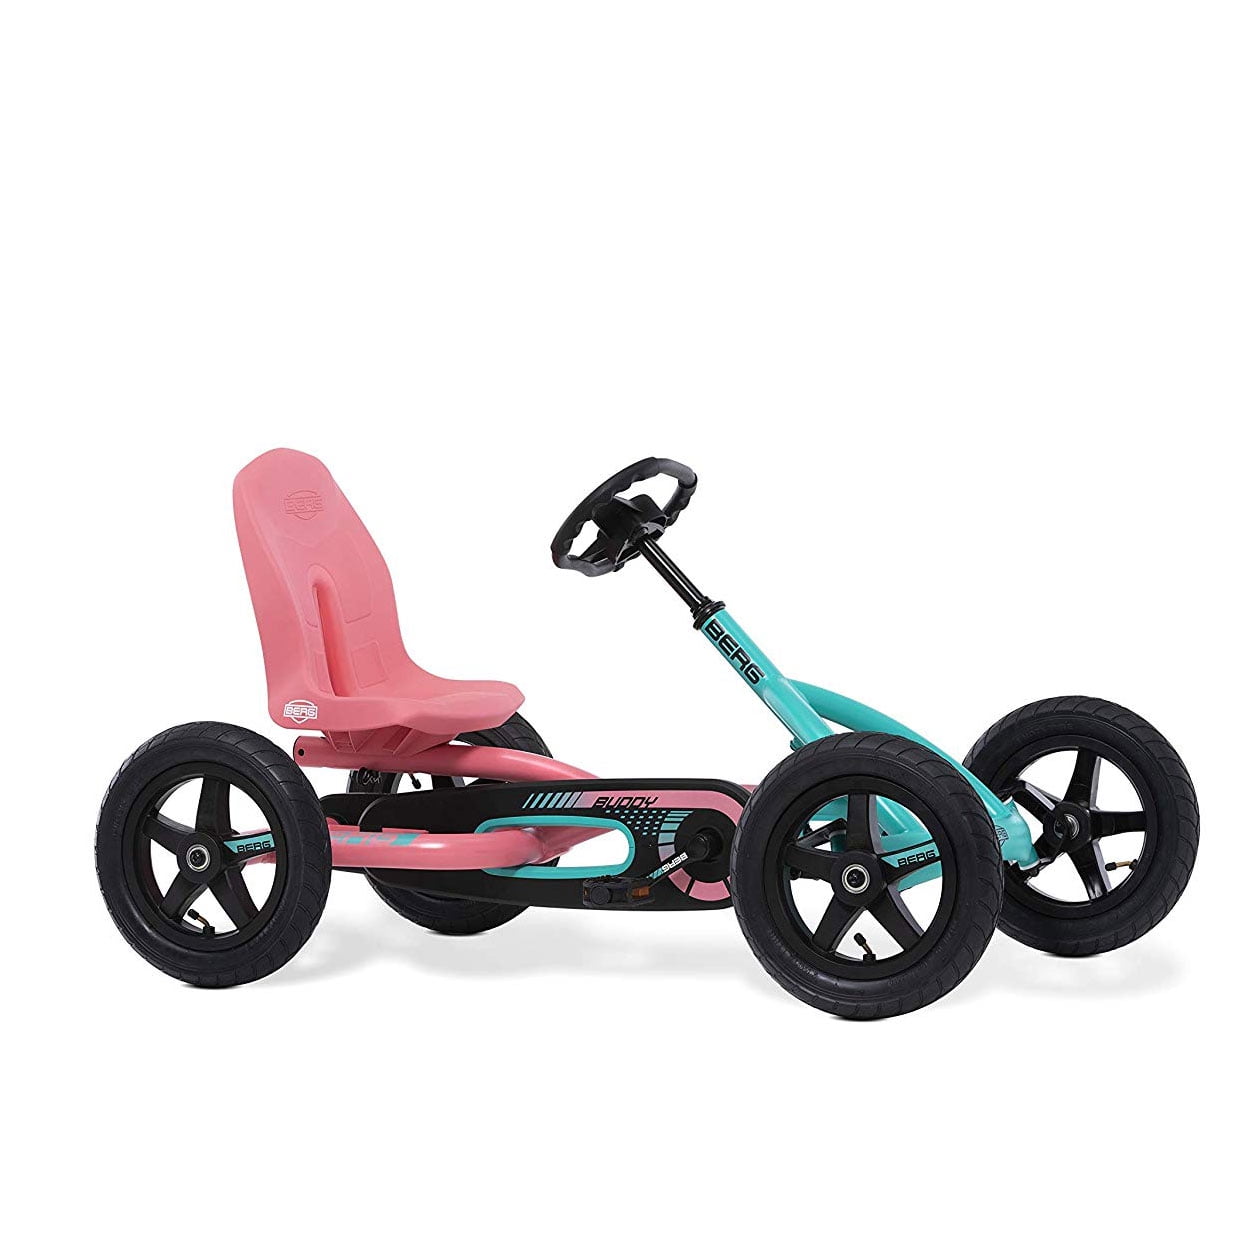 BERG Compact Pink Pedal Cart Go Kart Berg Toys 5 Years + New (SEE